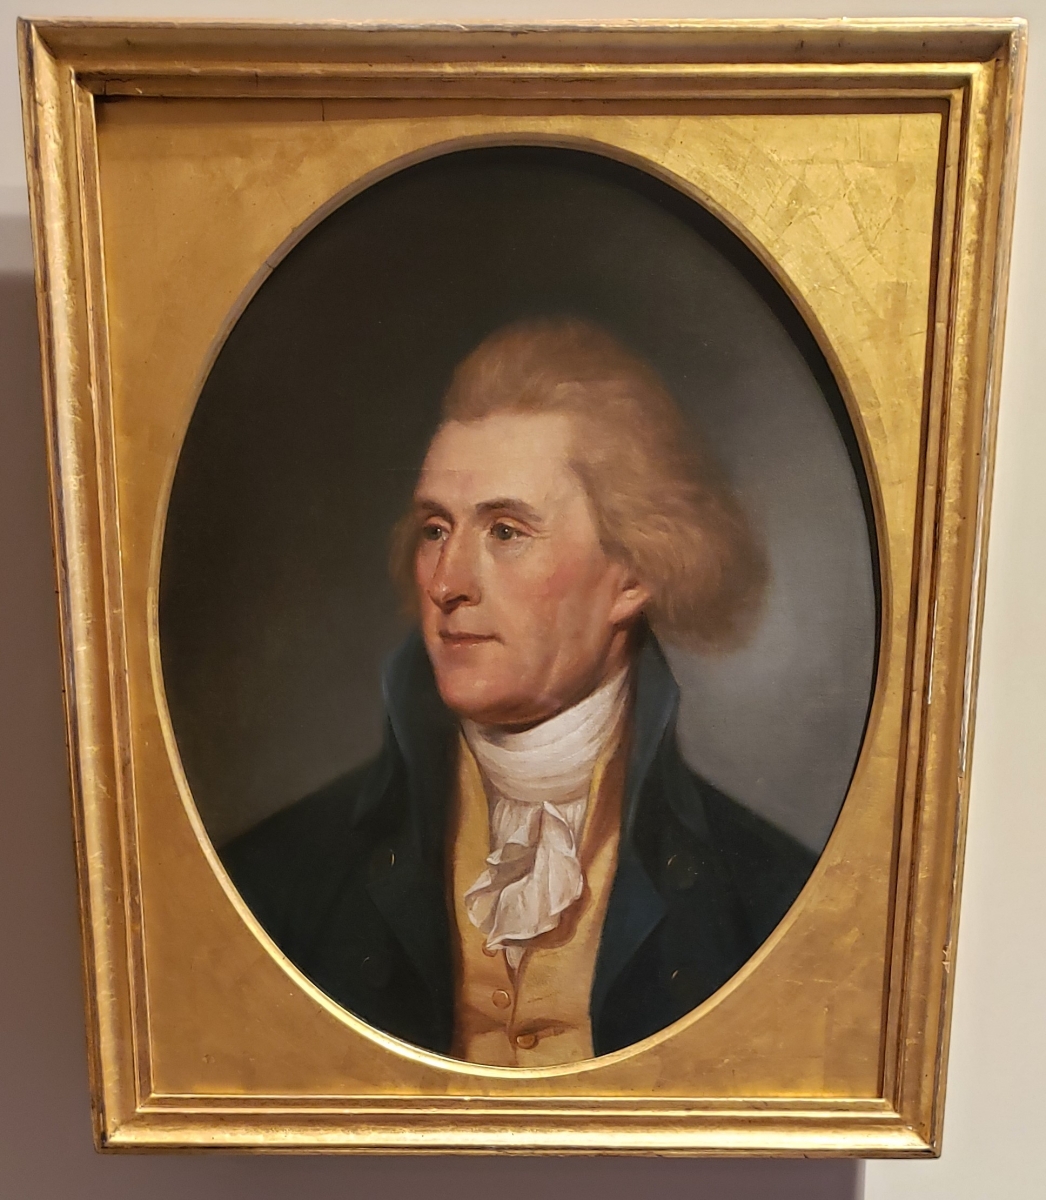 Portrait of Thomas Jefferson in Second Bank of the United States Portrait Gallery